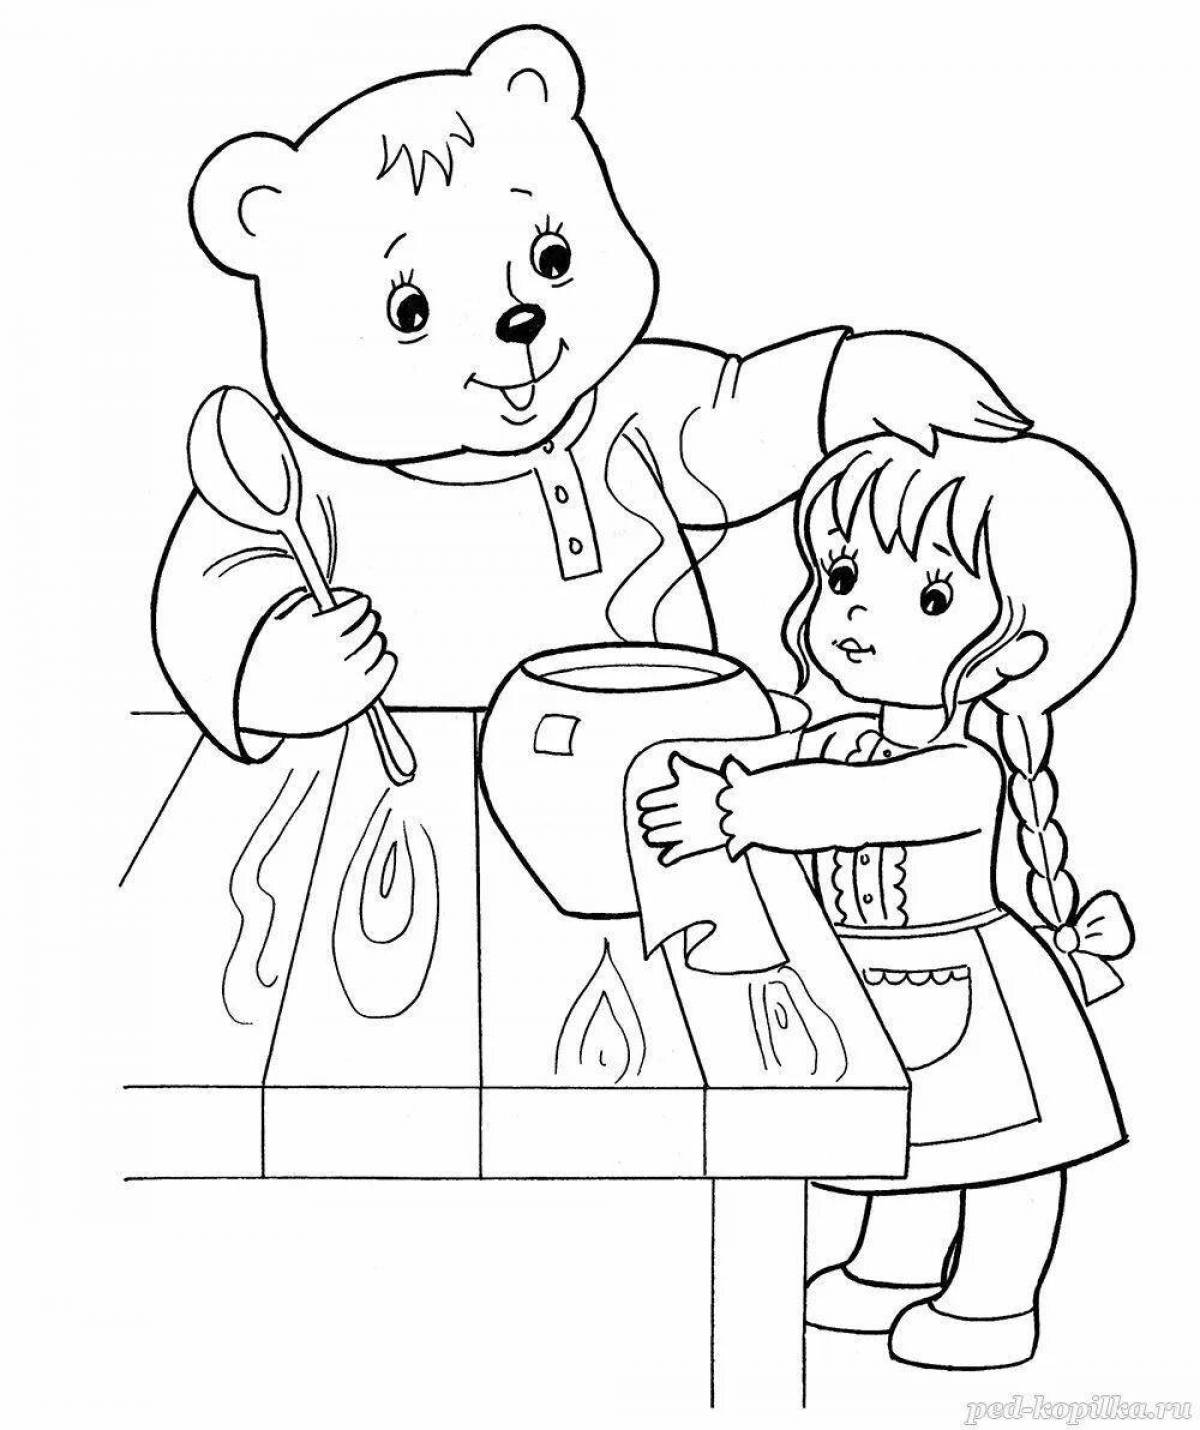 Three bears bright coloring book for younger students